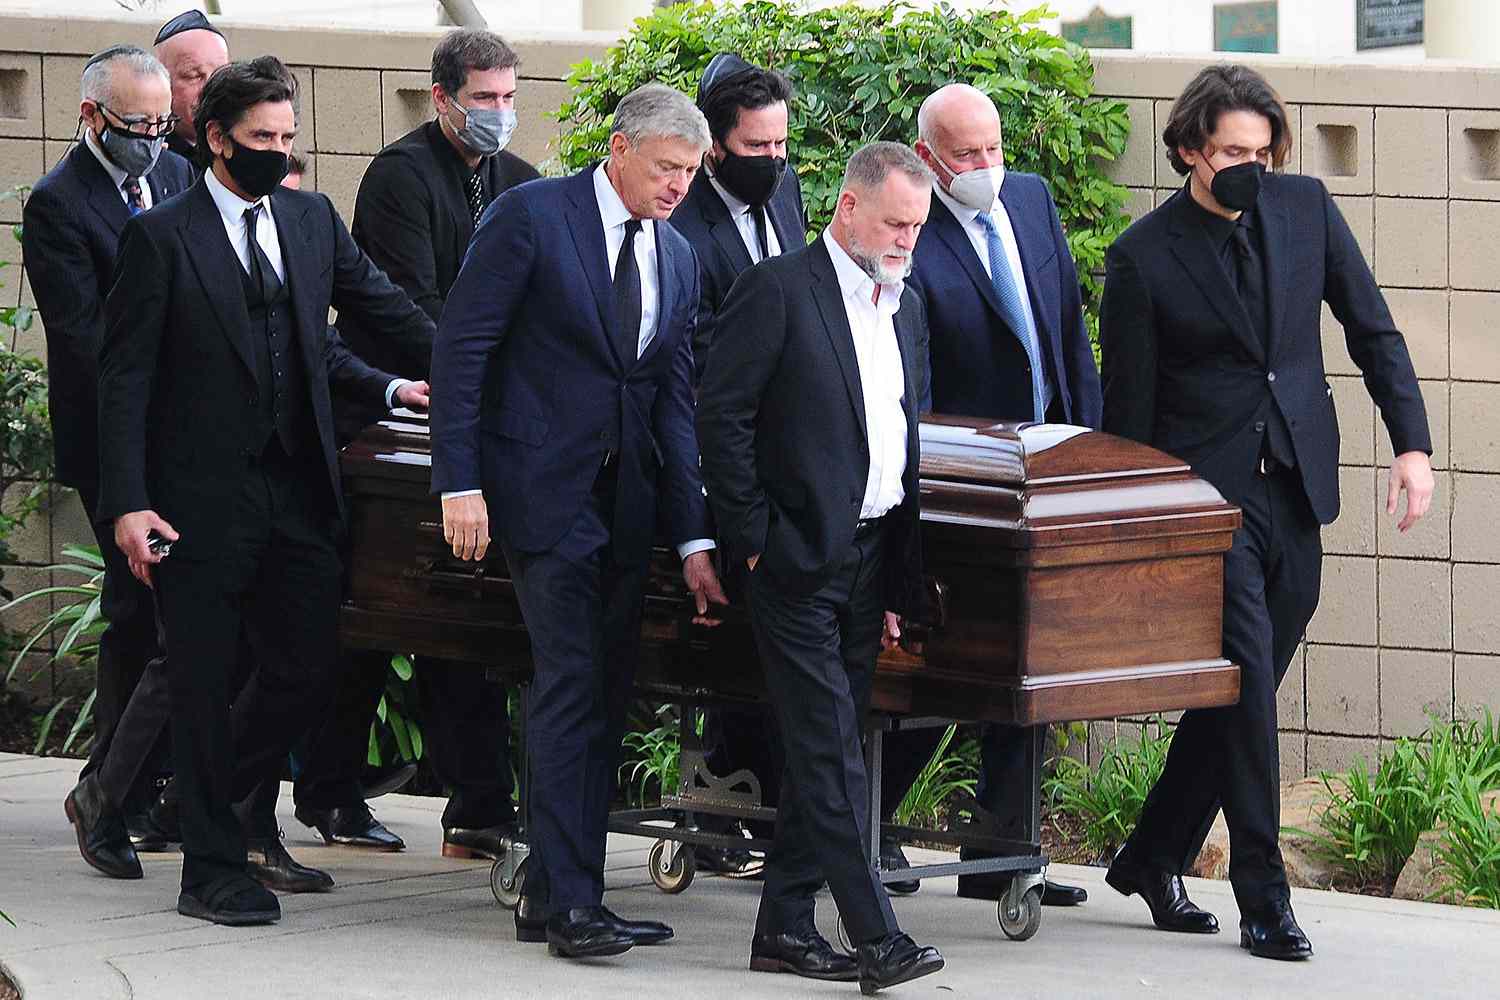 Bob Saget’s teammates and other celebrities attend his funeral